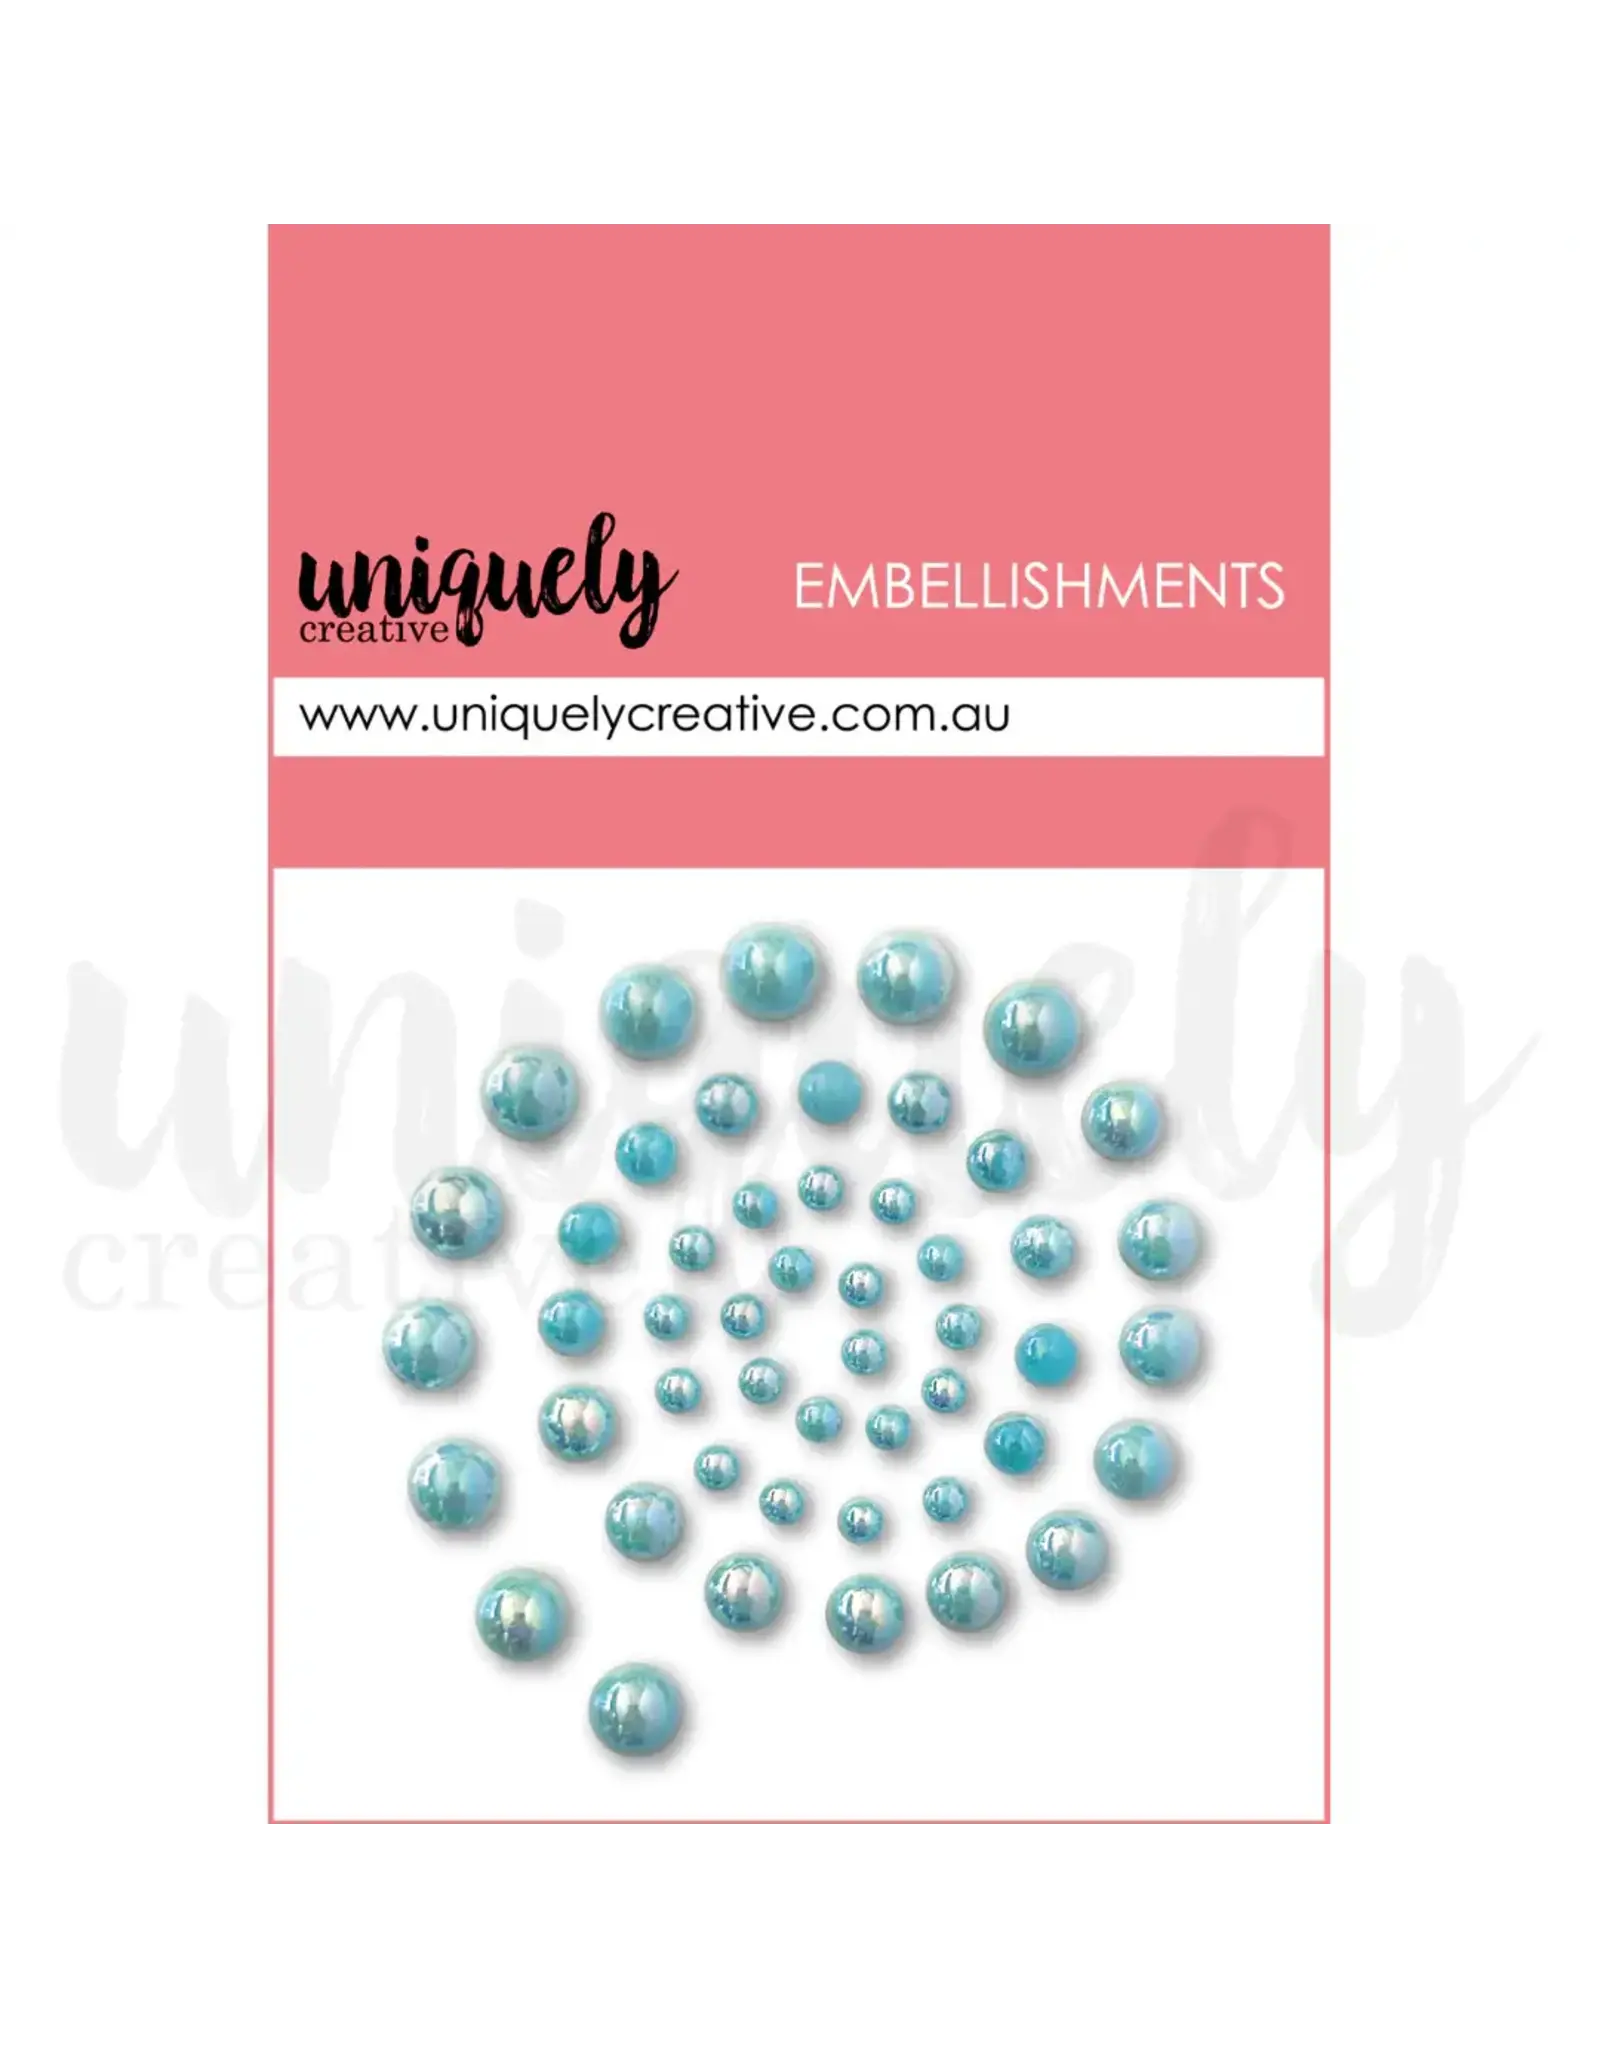 UNIQUELY CREATIVE LIGHT BLUE PEARLS EMBELLIES PEARL EMBELLISHMENTS